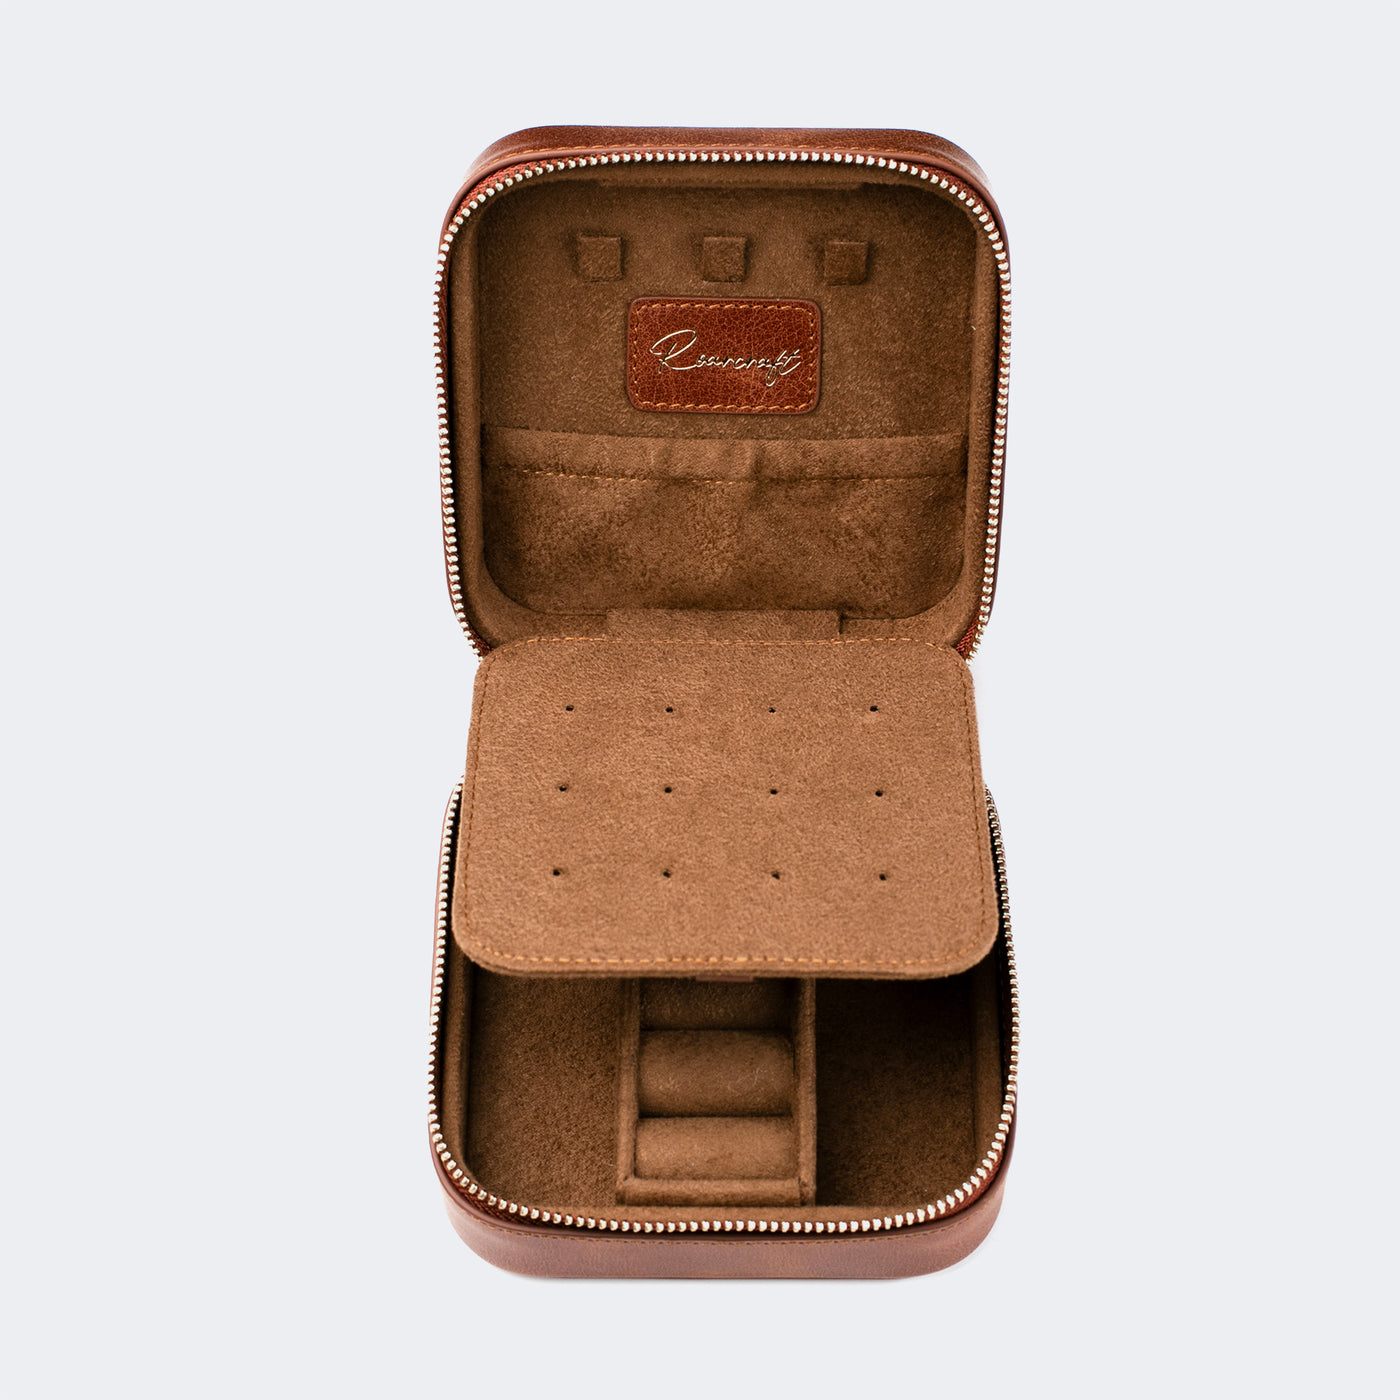 Leather Travel Jewelry Case - Tobacco